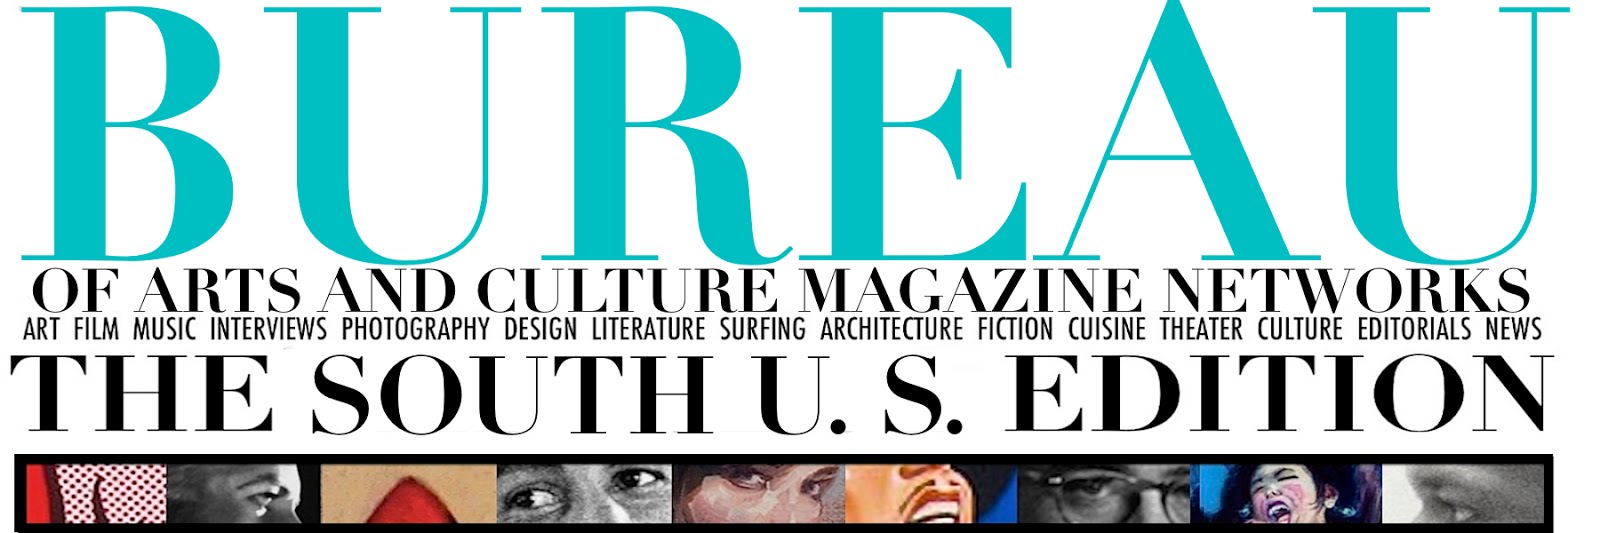 VISIT BUREAU OF ARTS AND CULTURE MAIN MAGAZINE SITE for AUDIO INTERVIEWS, AUDIO ARTICLES AND MORE !